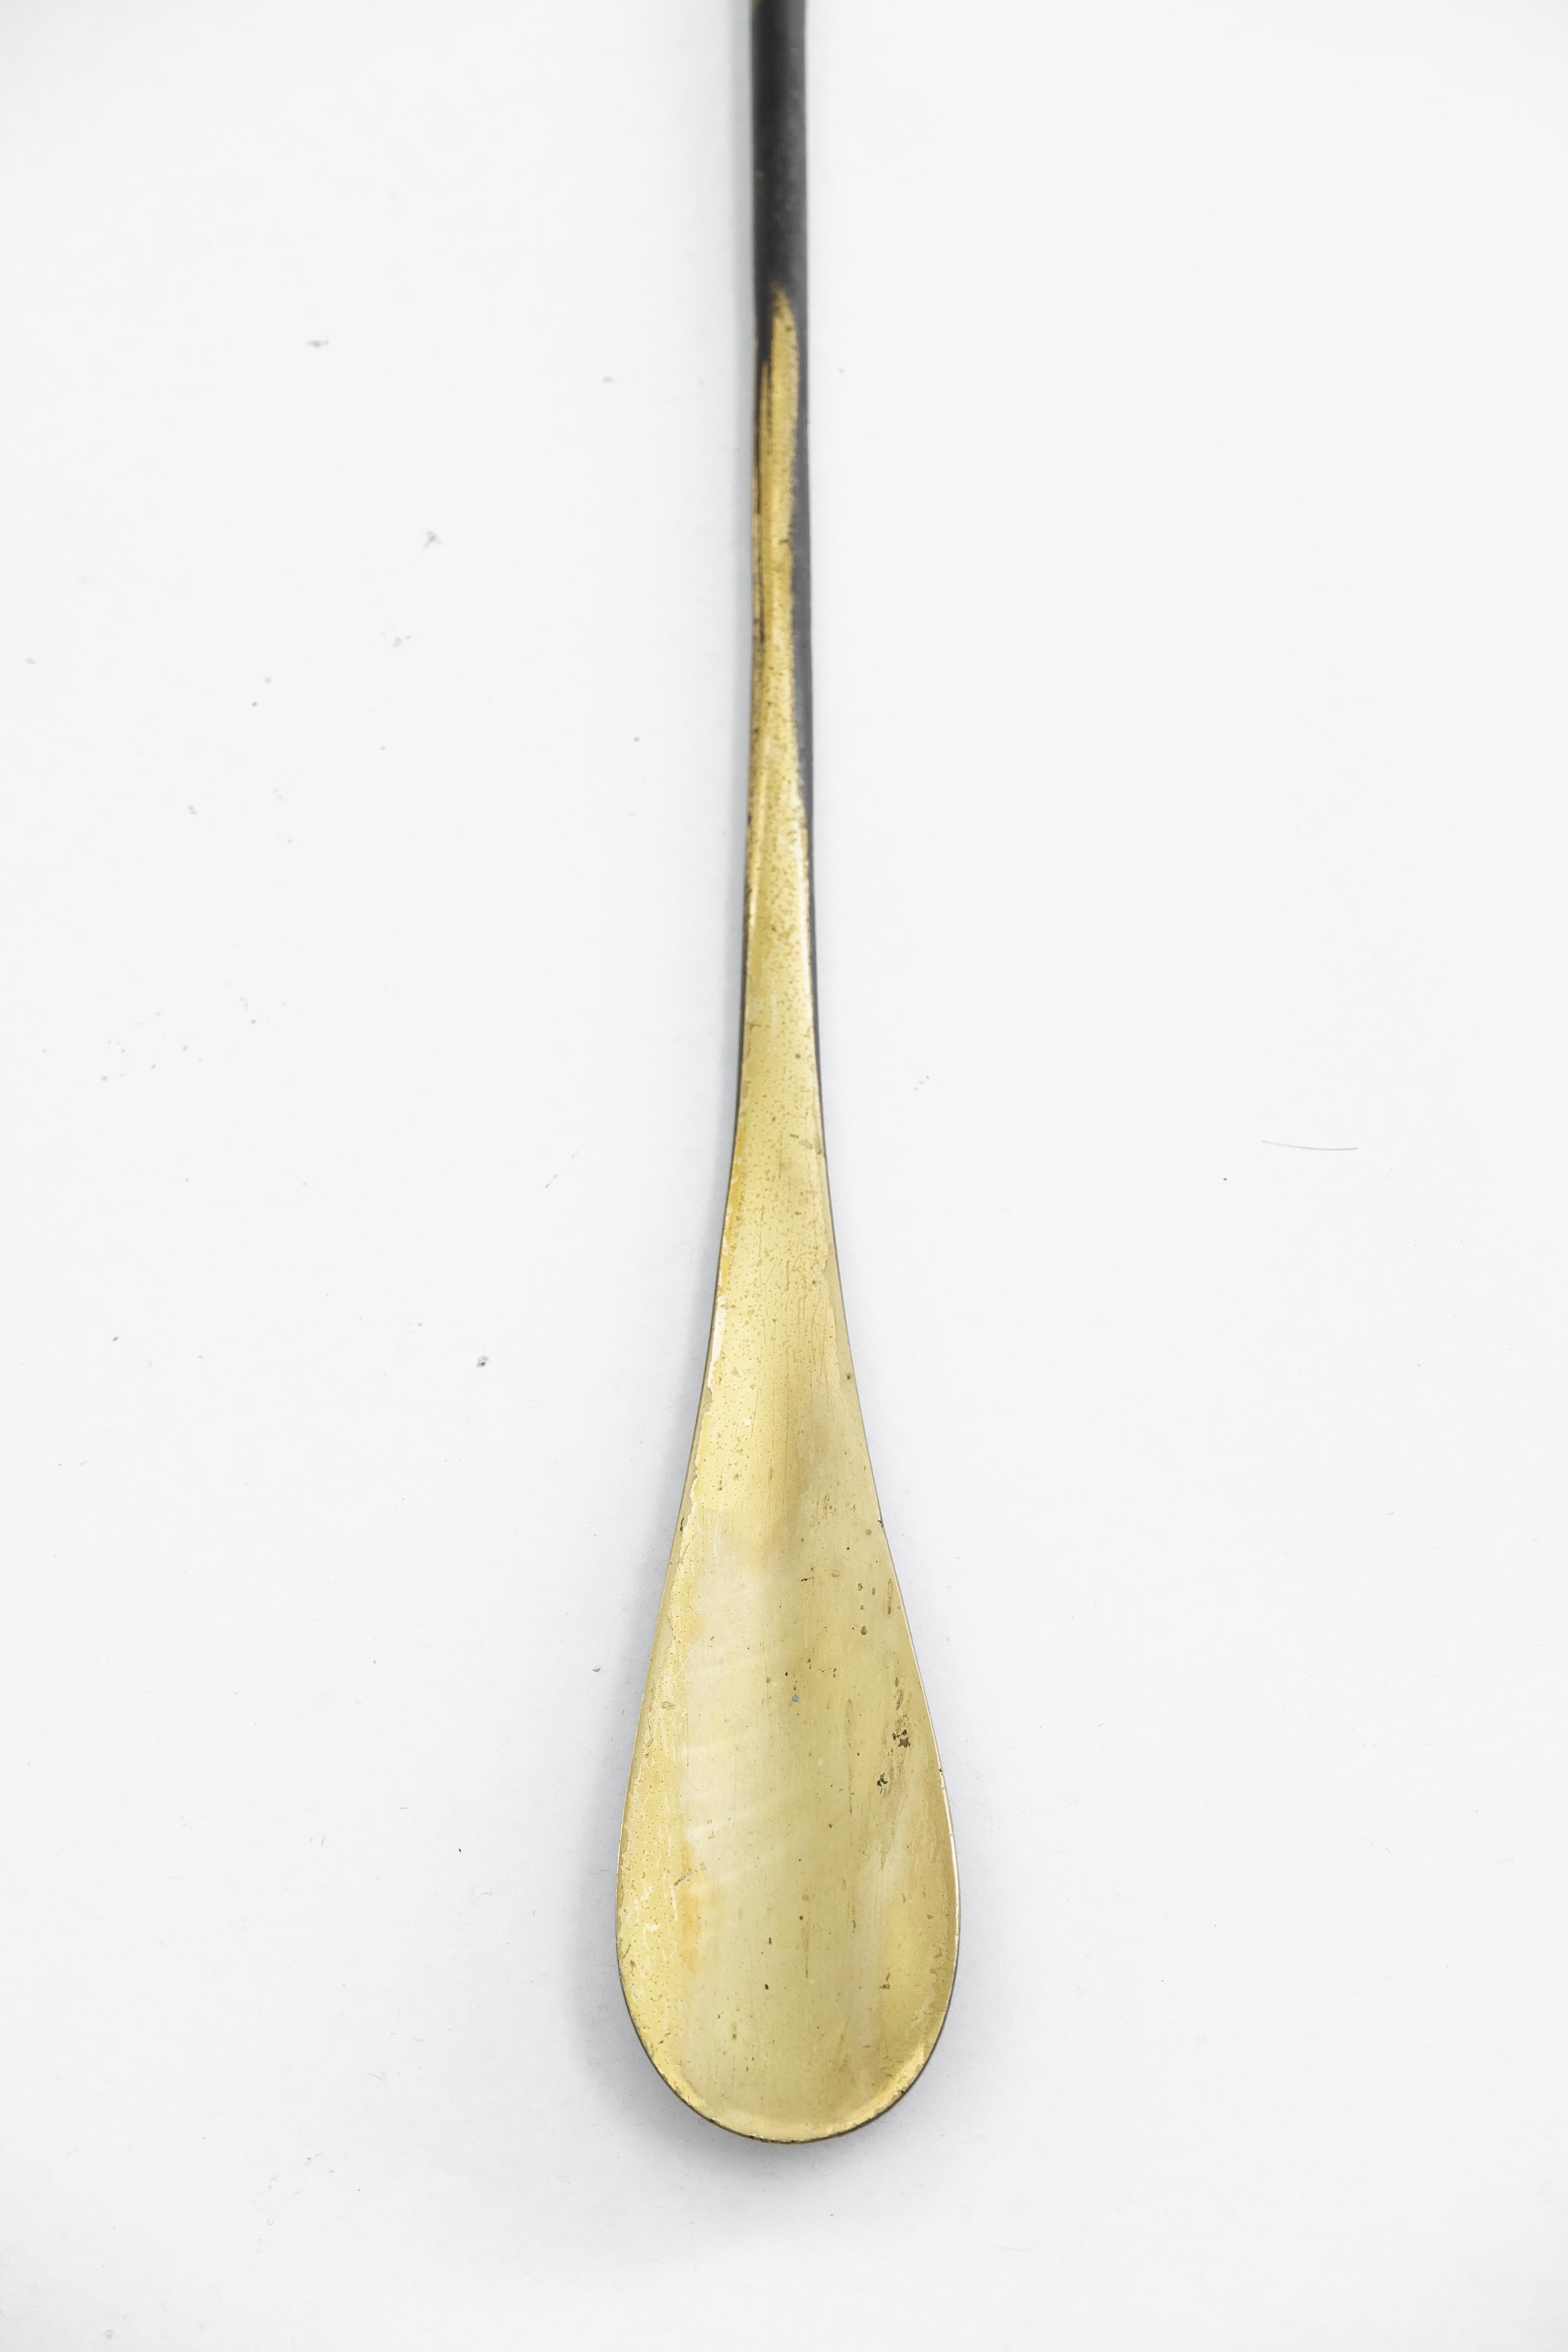 Austrian Shoehorn Shows a Capricorn by Walter Bosse